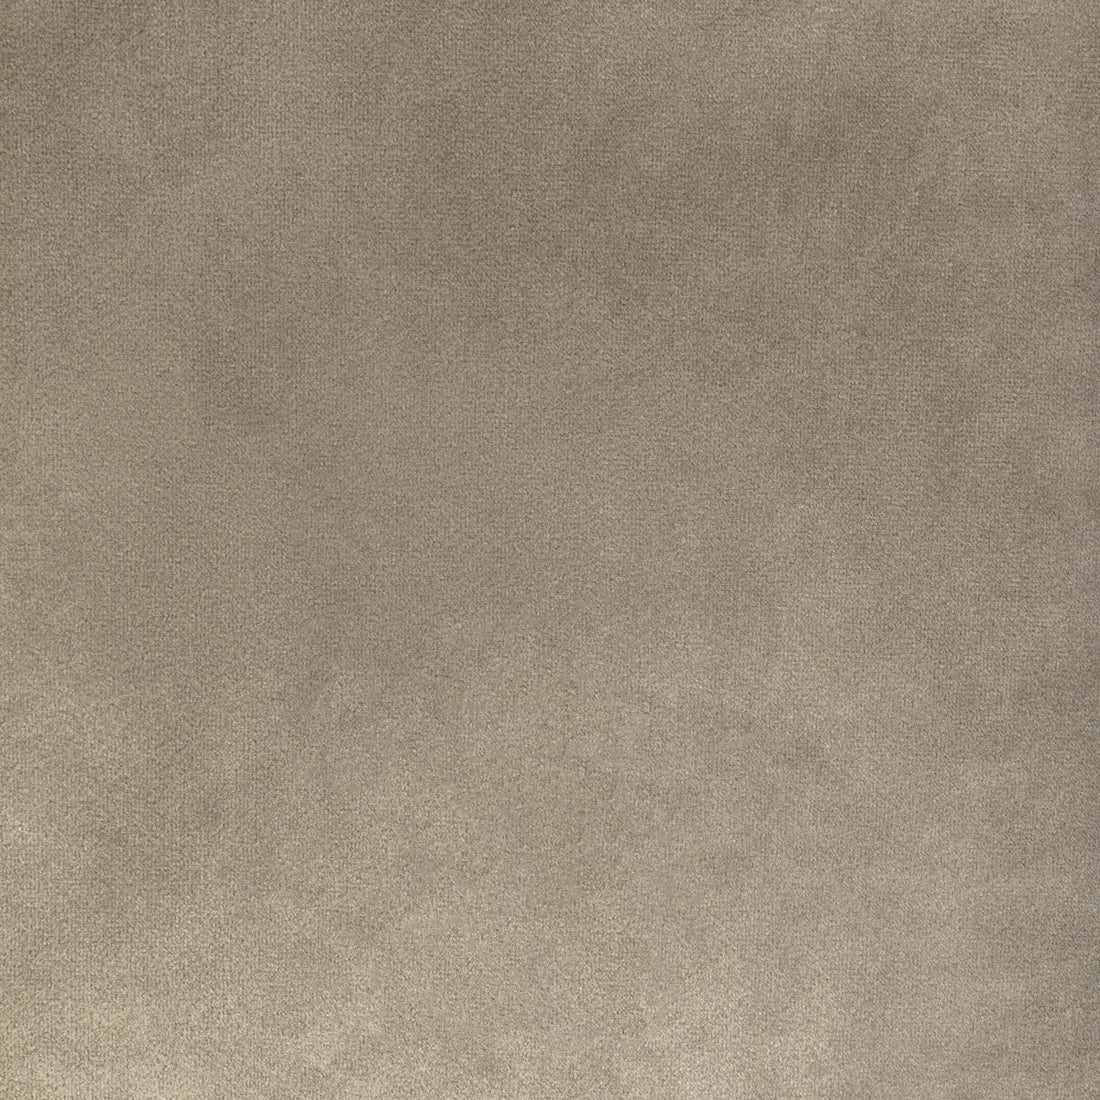 Rocco Velvet fabric in stone color - pattern 36652.16.0 - by Kravet Contract